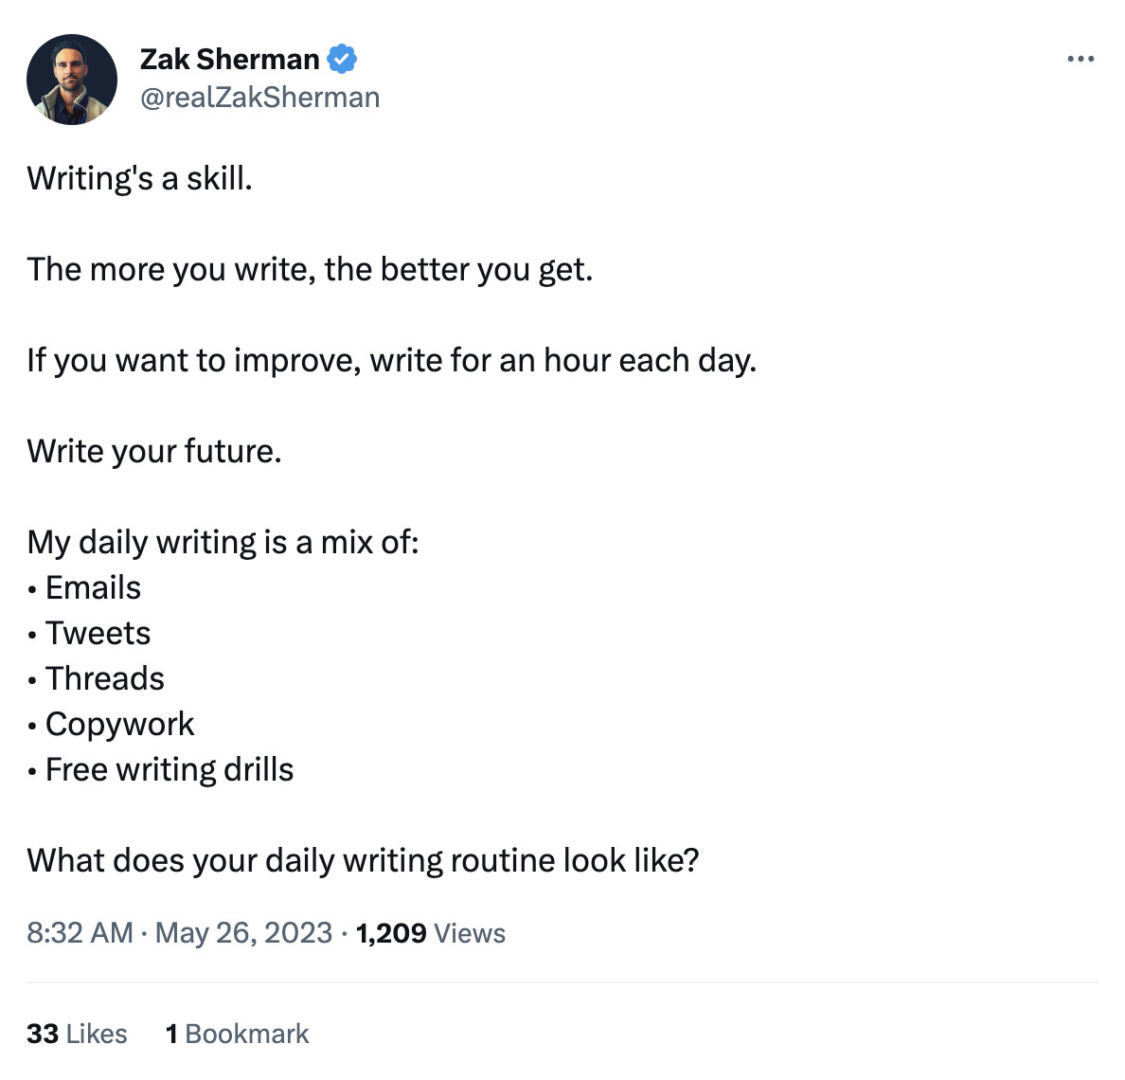 Content creator Zak Sherman tweeted a list of ways he practices writing every day including in emails, tweets, and threads.